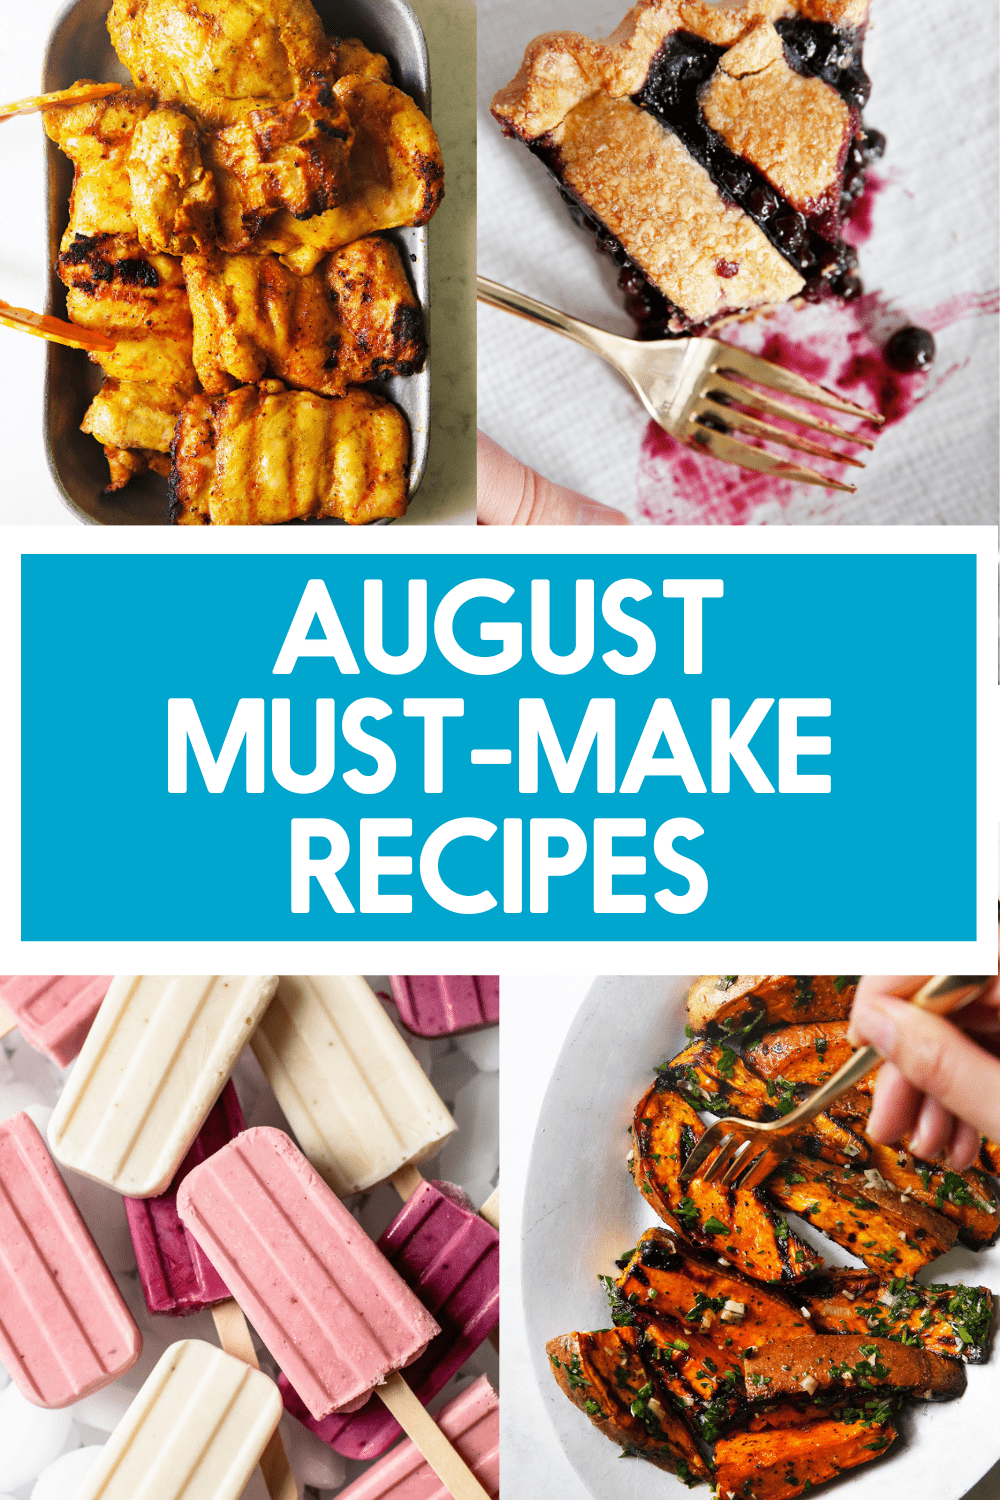 What to Cook in August